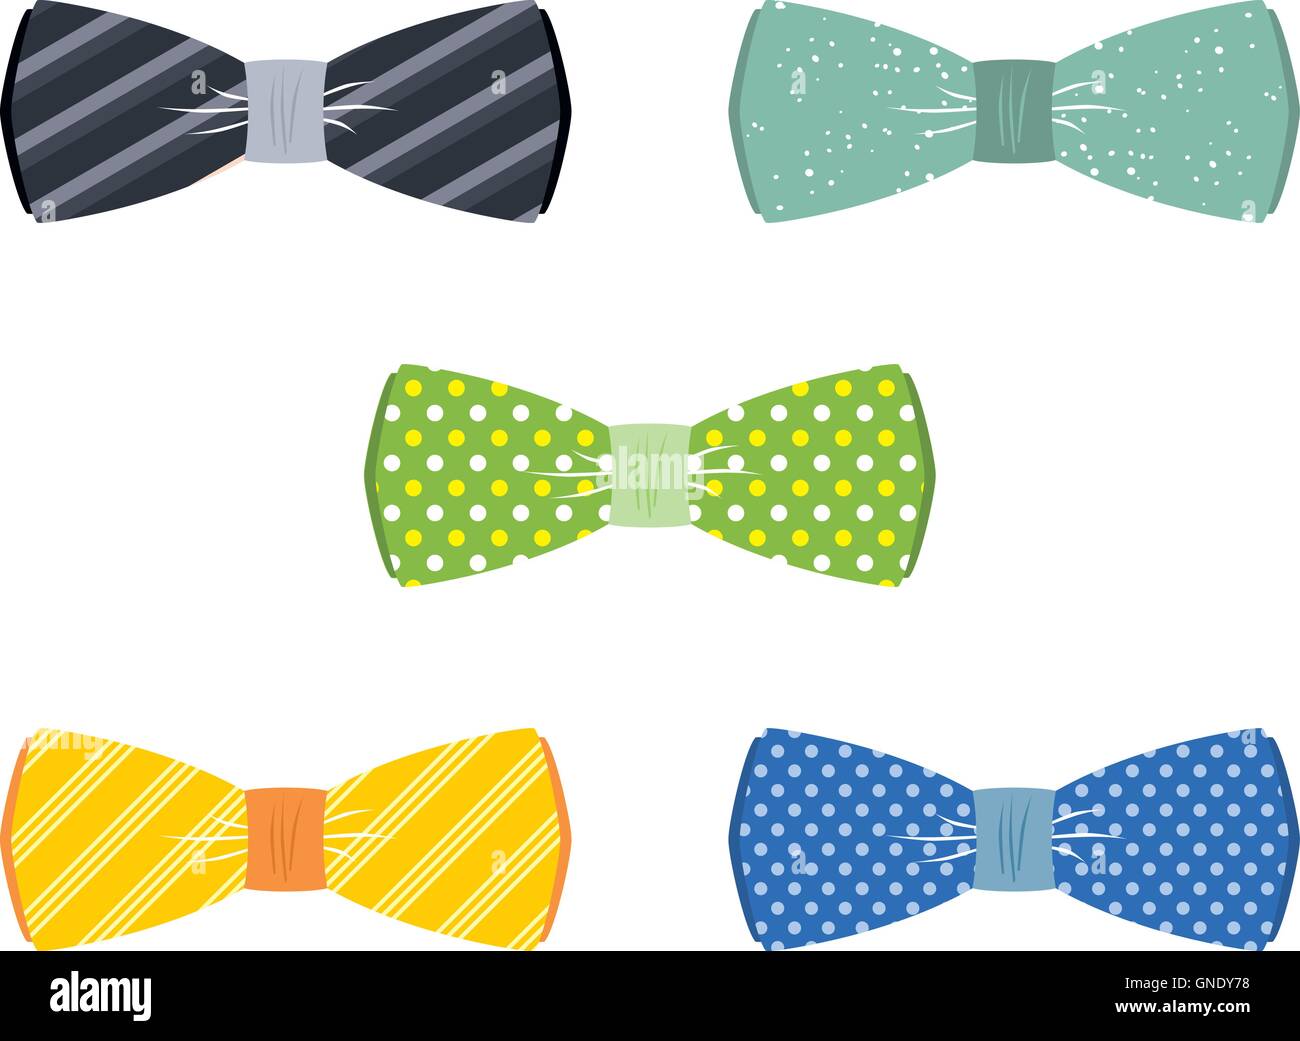 Neck bow Stock Vector Images - Alamy